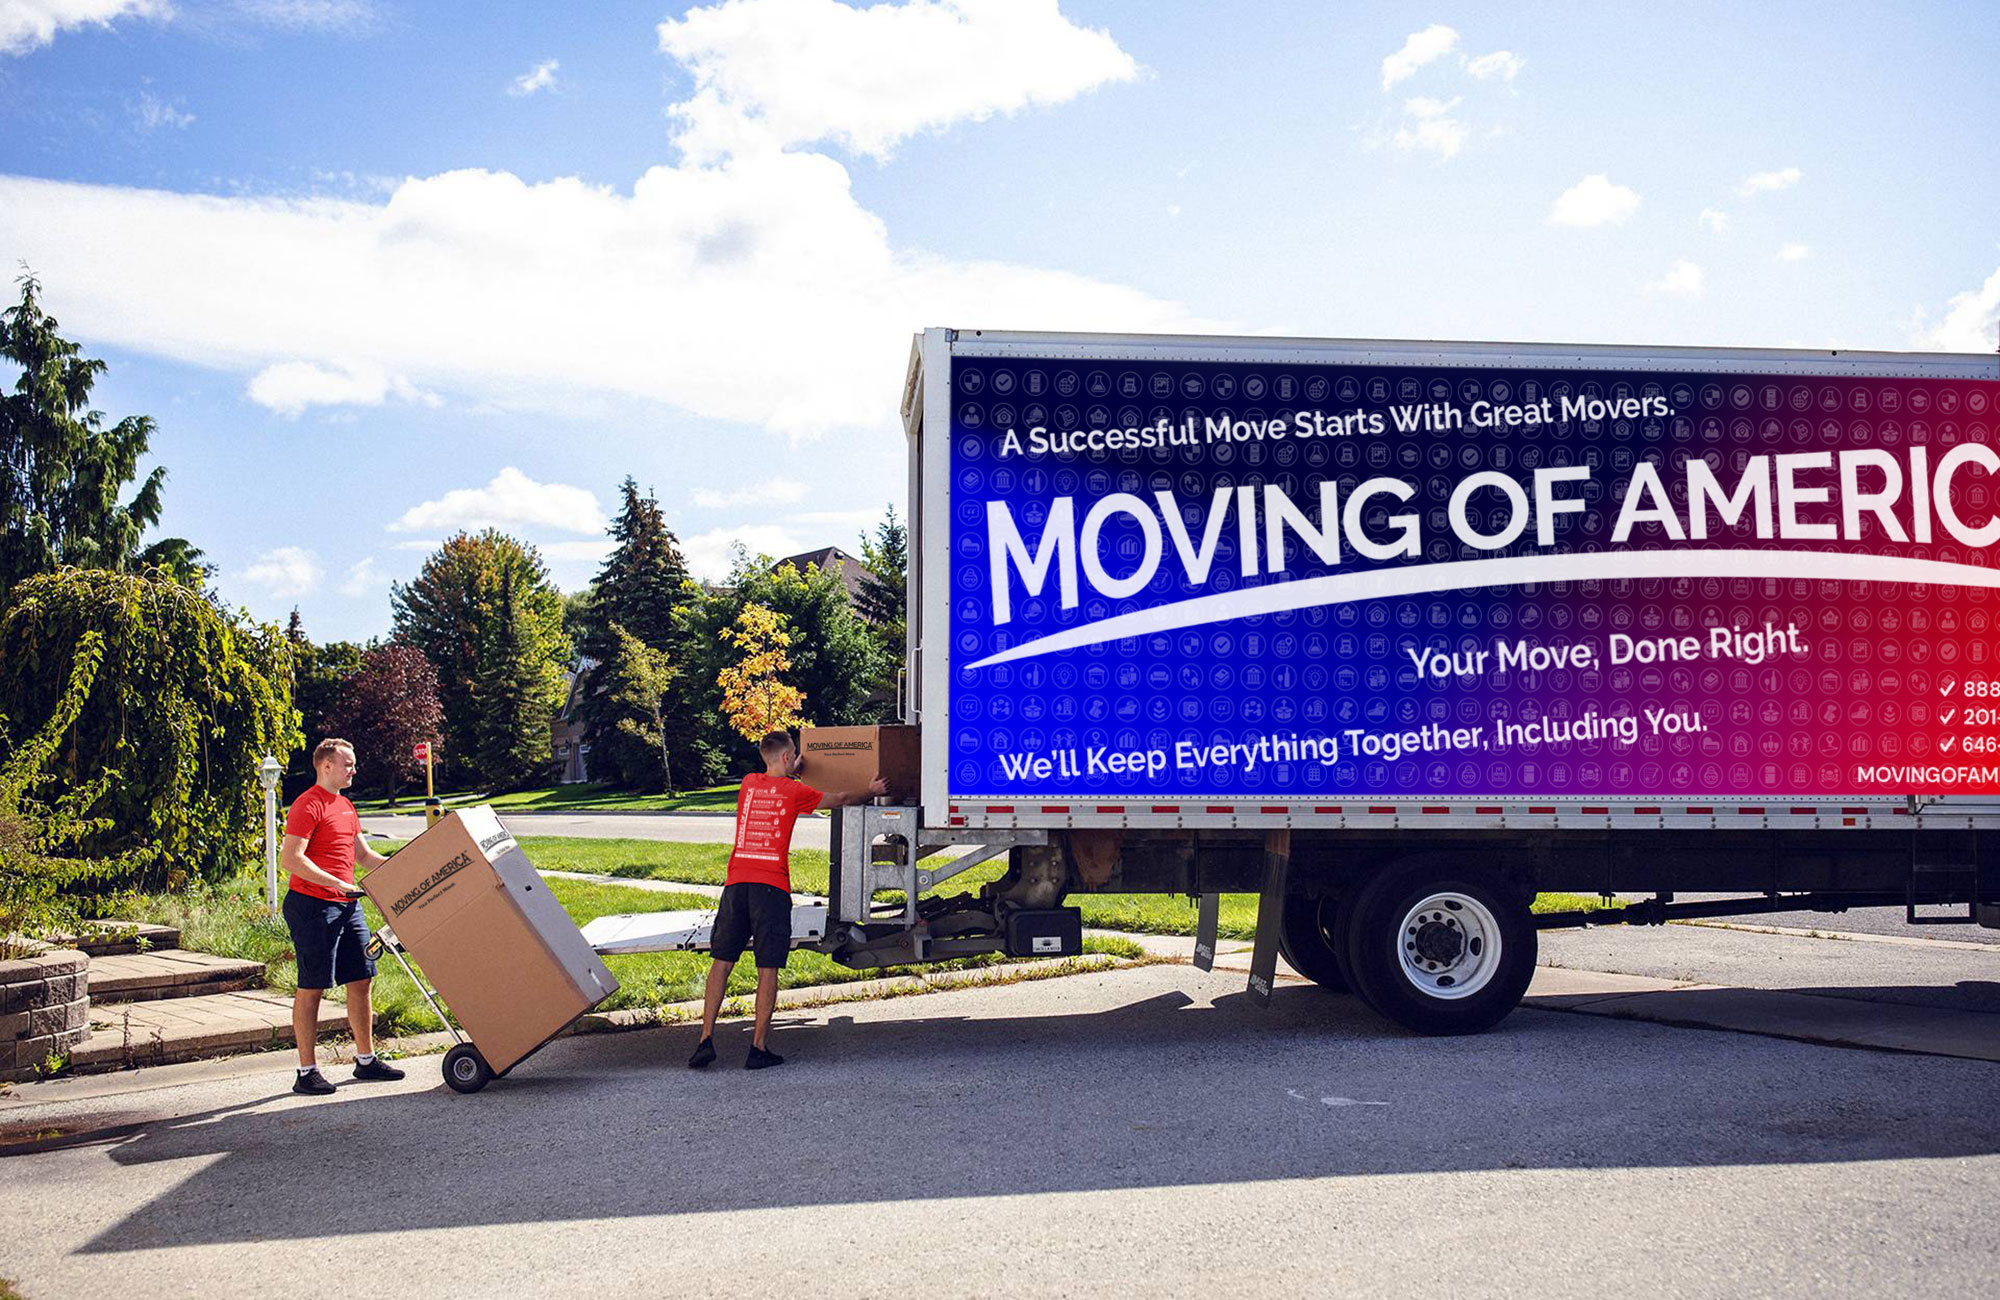 North Caldwell Movers Make Navigating Through Essex County A Breeze